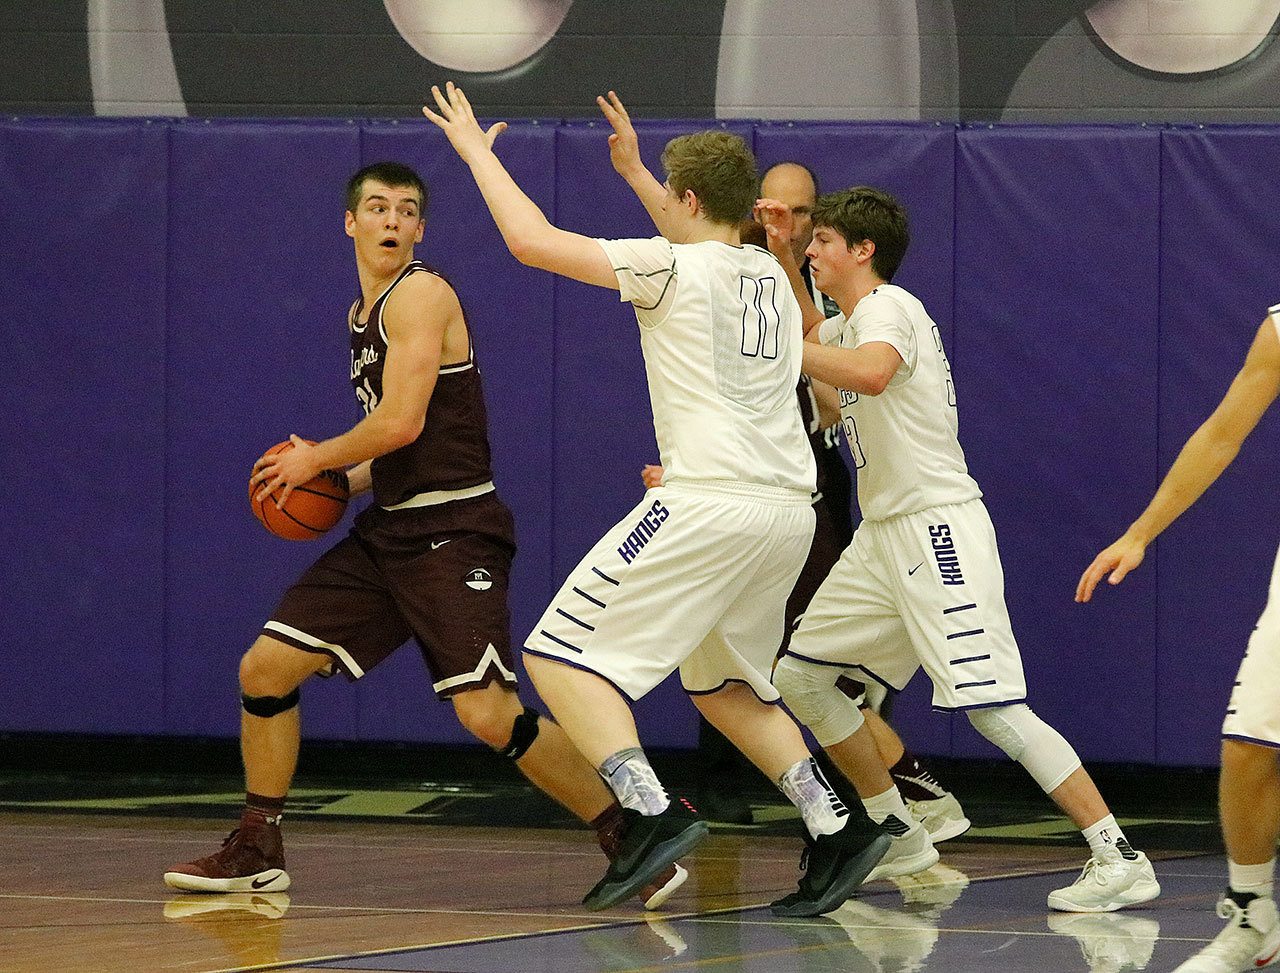 Mercer Island’s Griffin Emanuels looks to pass against Lake Washington defenders Griffin Barker (11) and Sam Linsky Friday at Lake Washington High School. The Kangs rallied to beat the Islanders 61-60 (Joe Livarchik/staff photo).